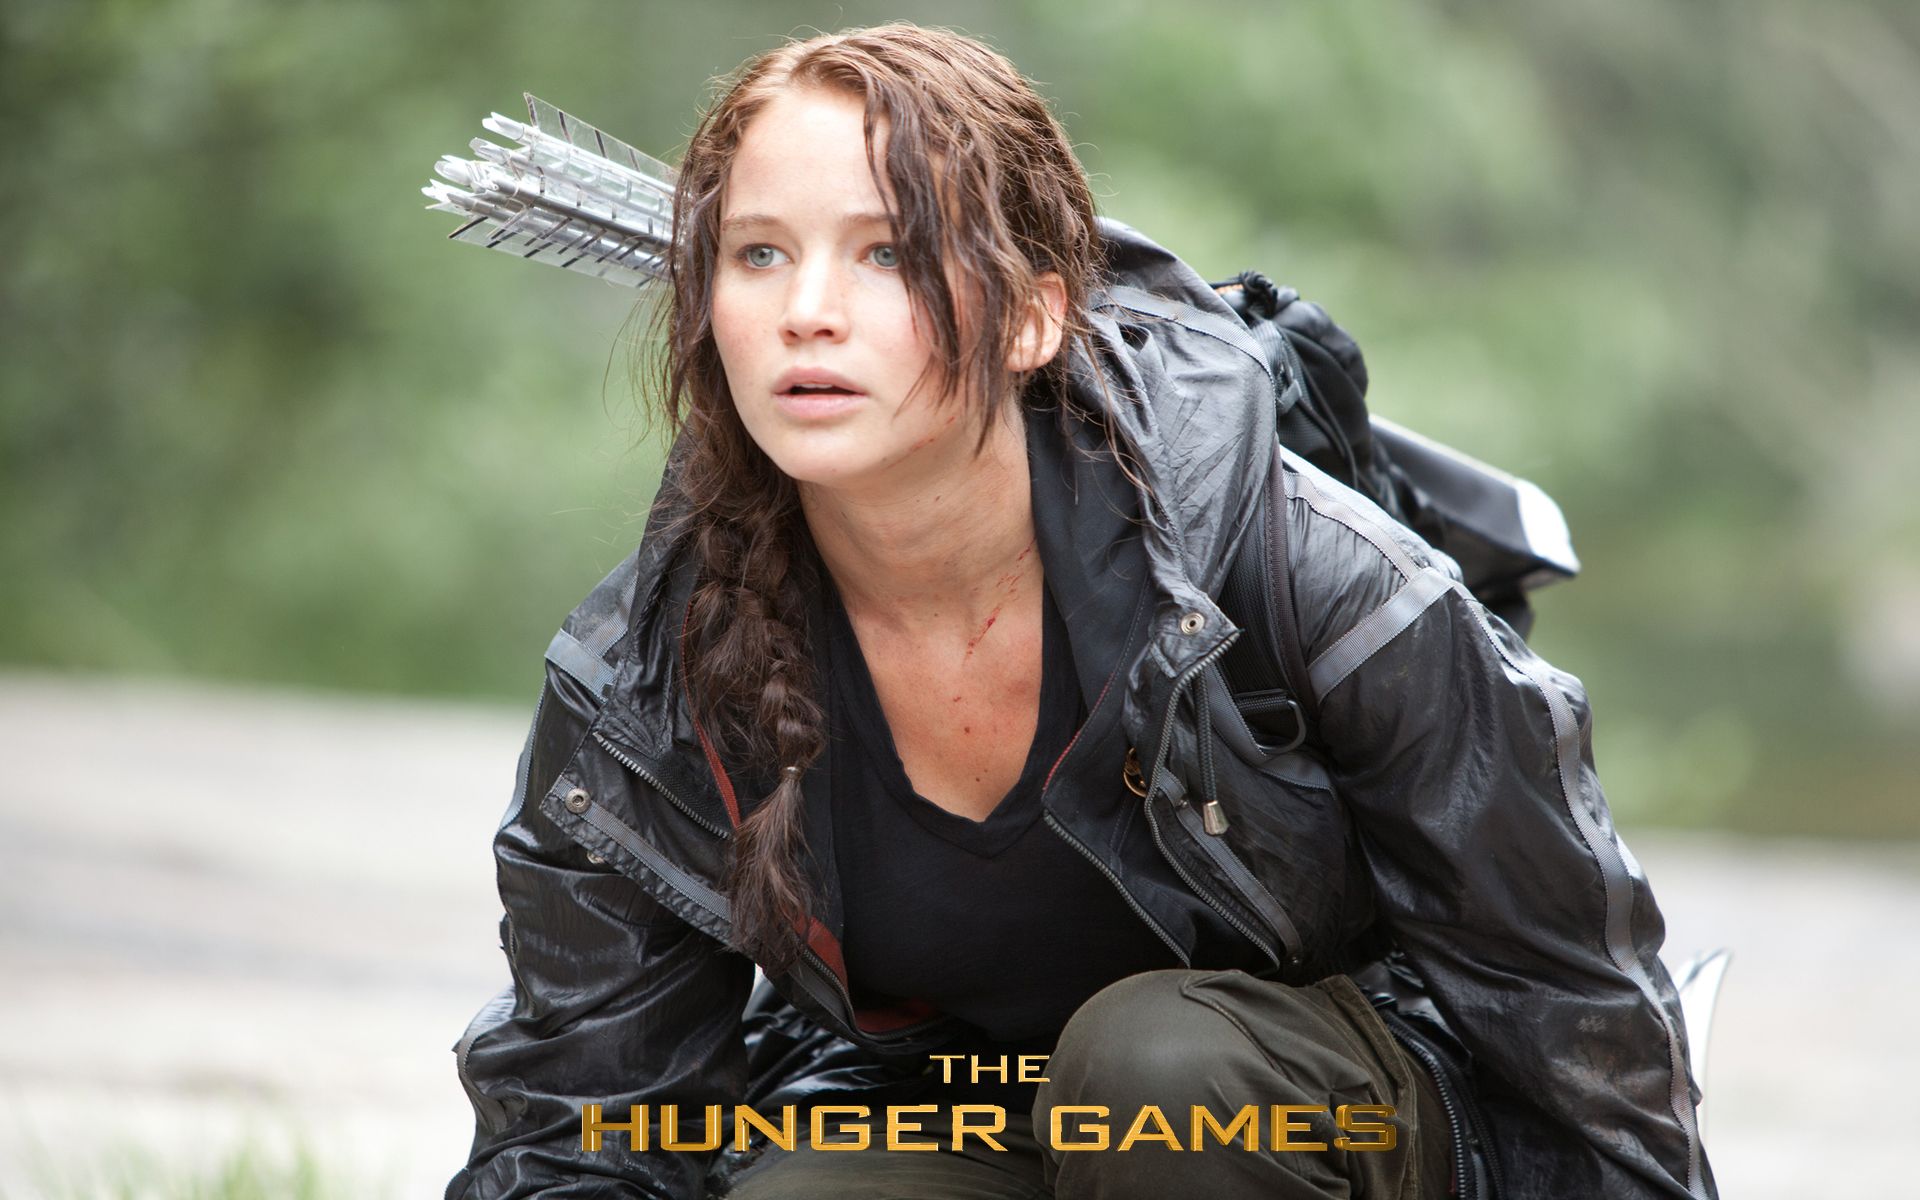 The Hunger Games Wallpapers - 1920x1200 - 1291735